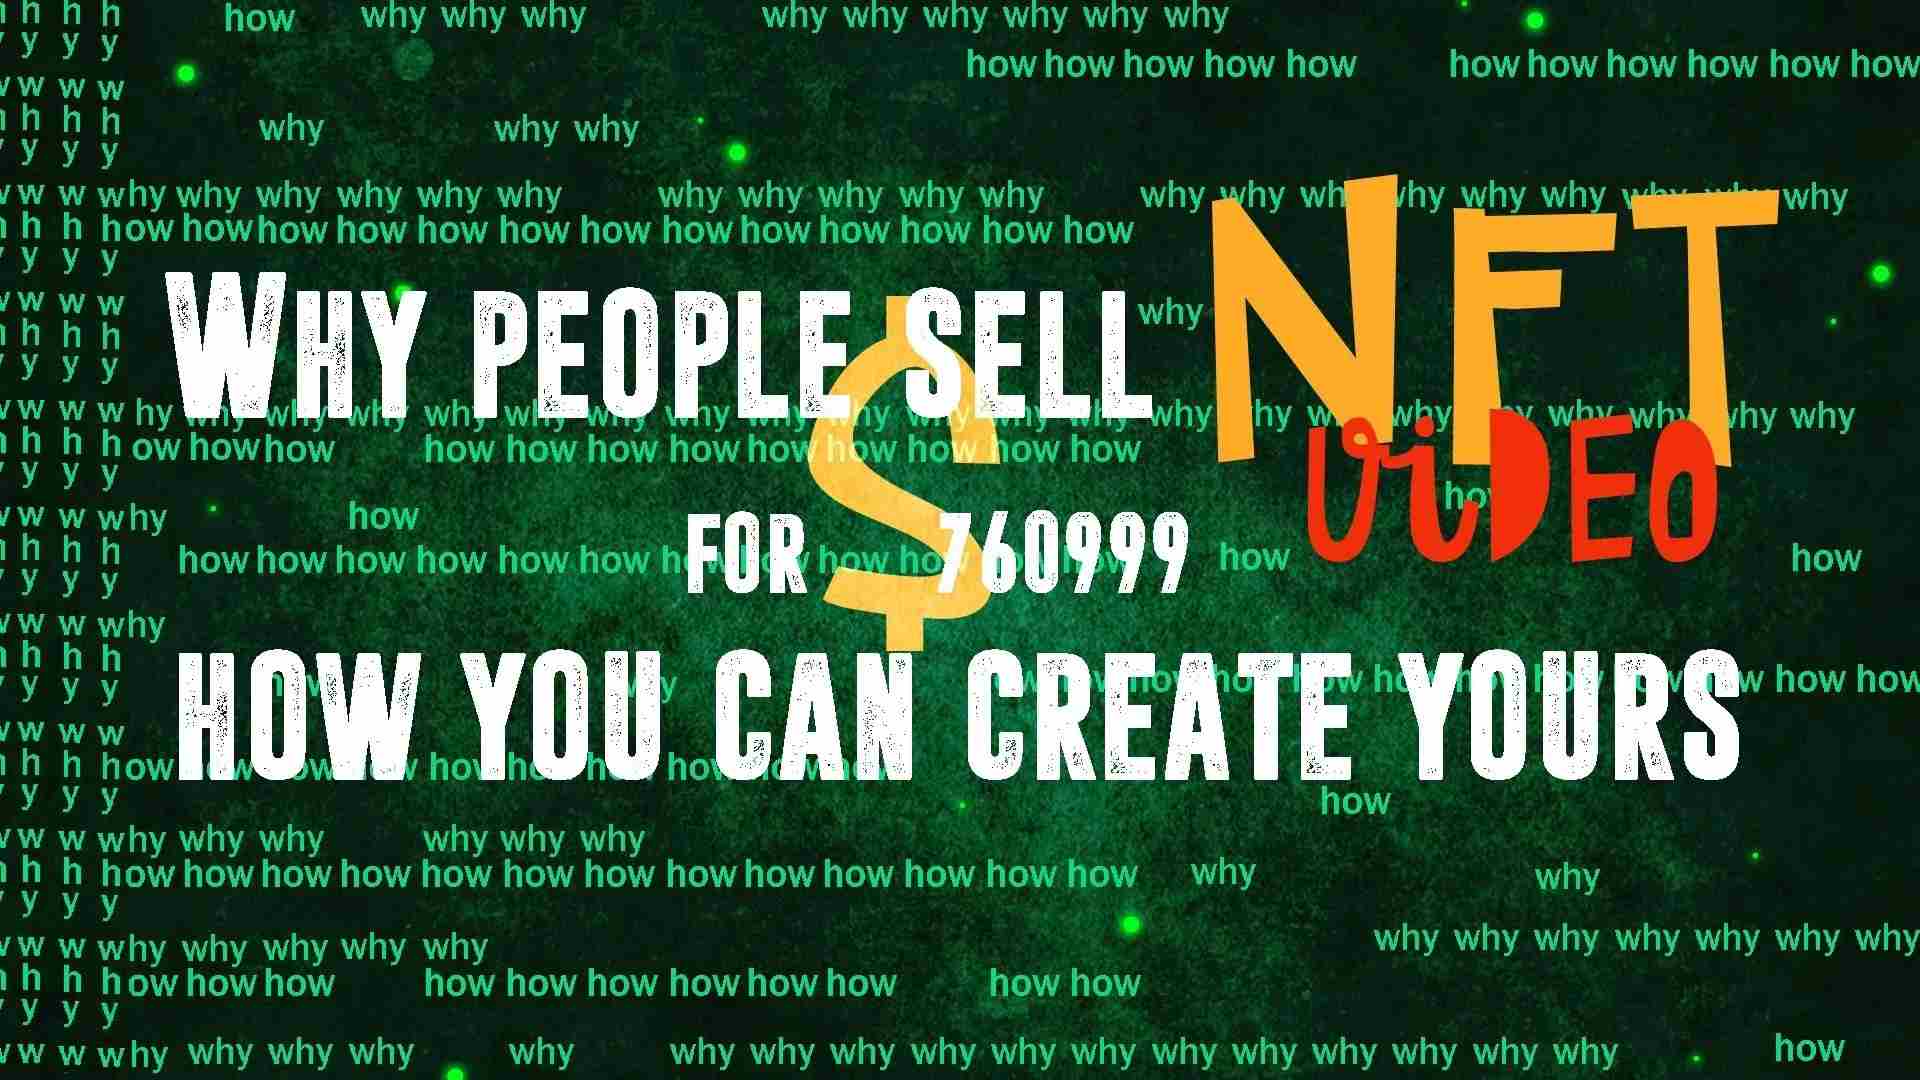 Why people sell NFT video for $760999